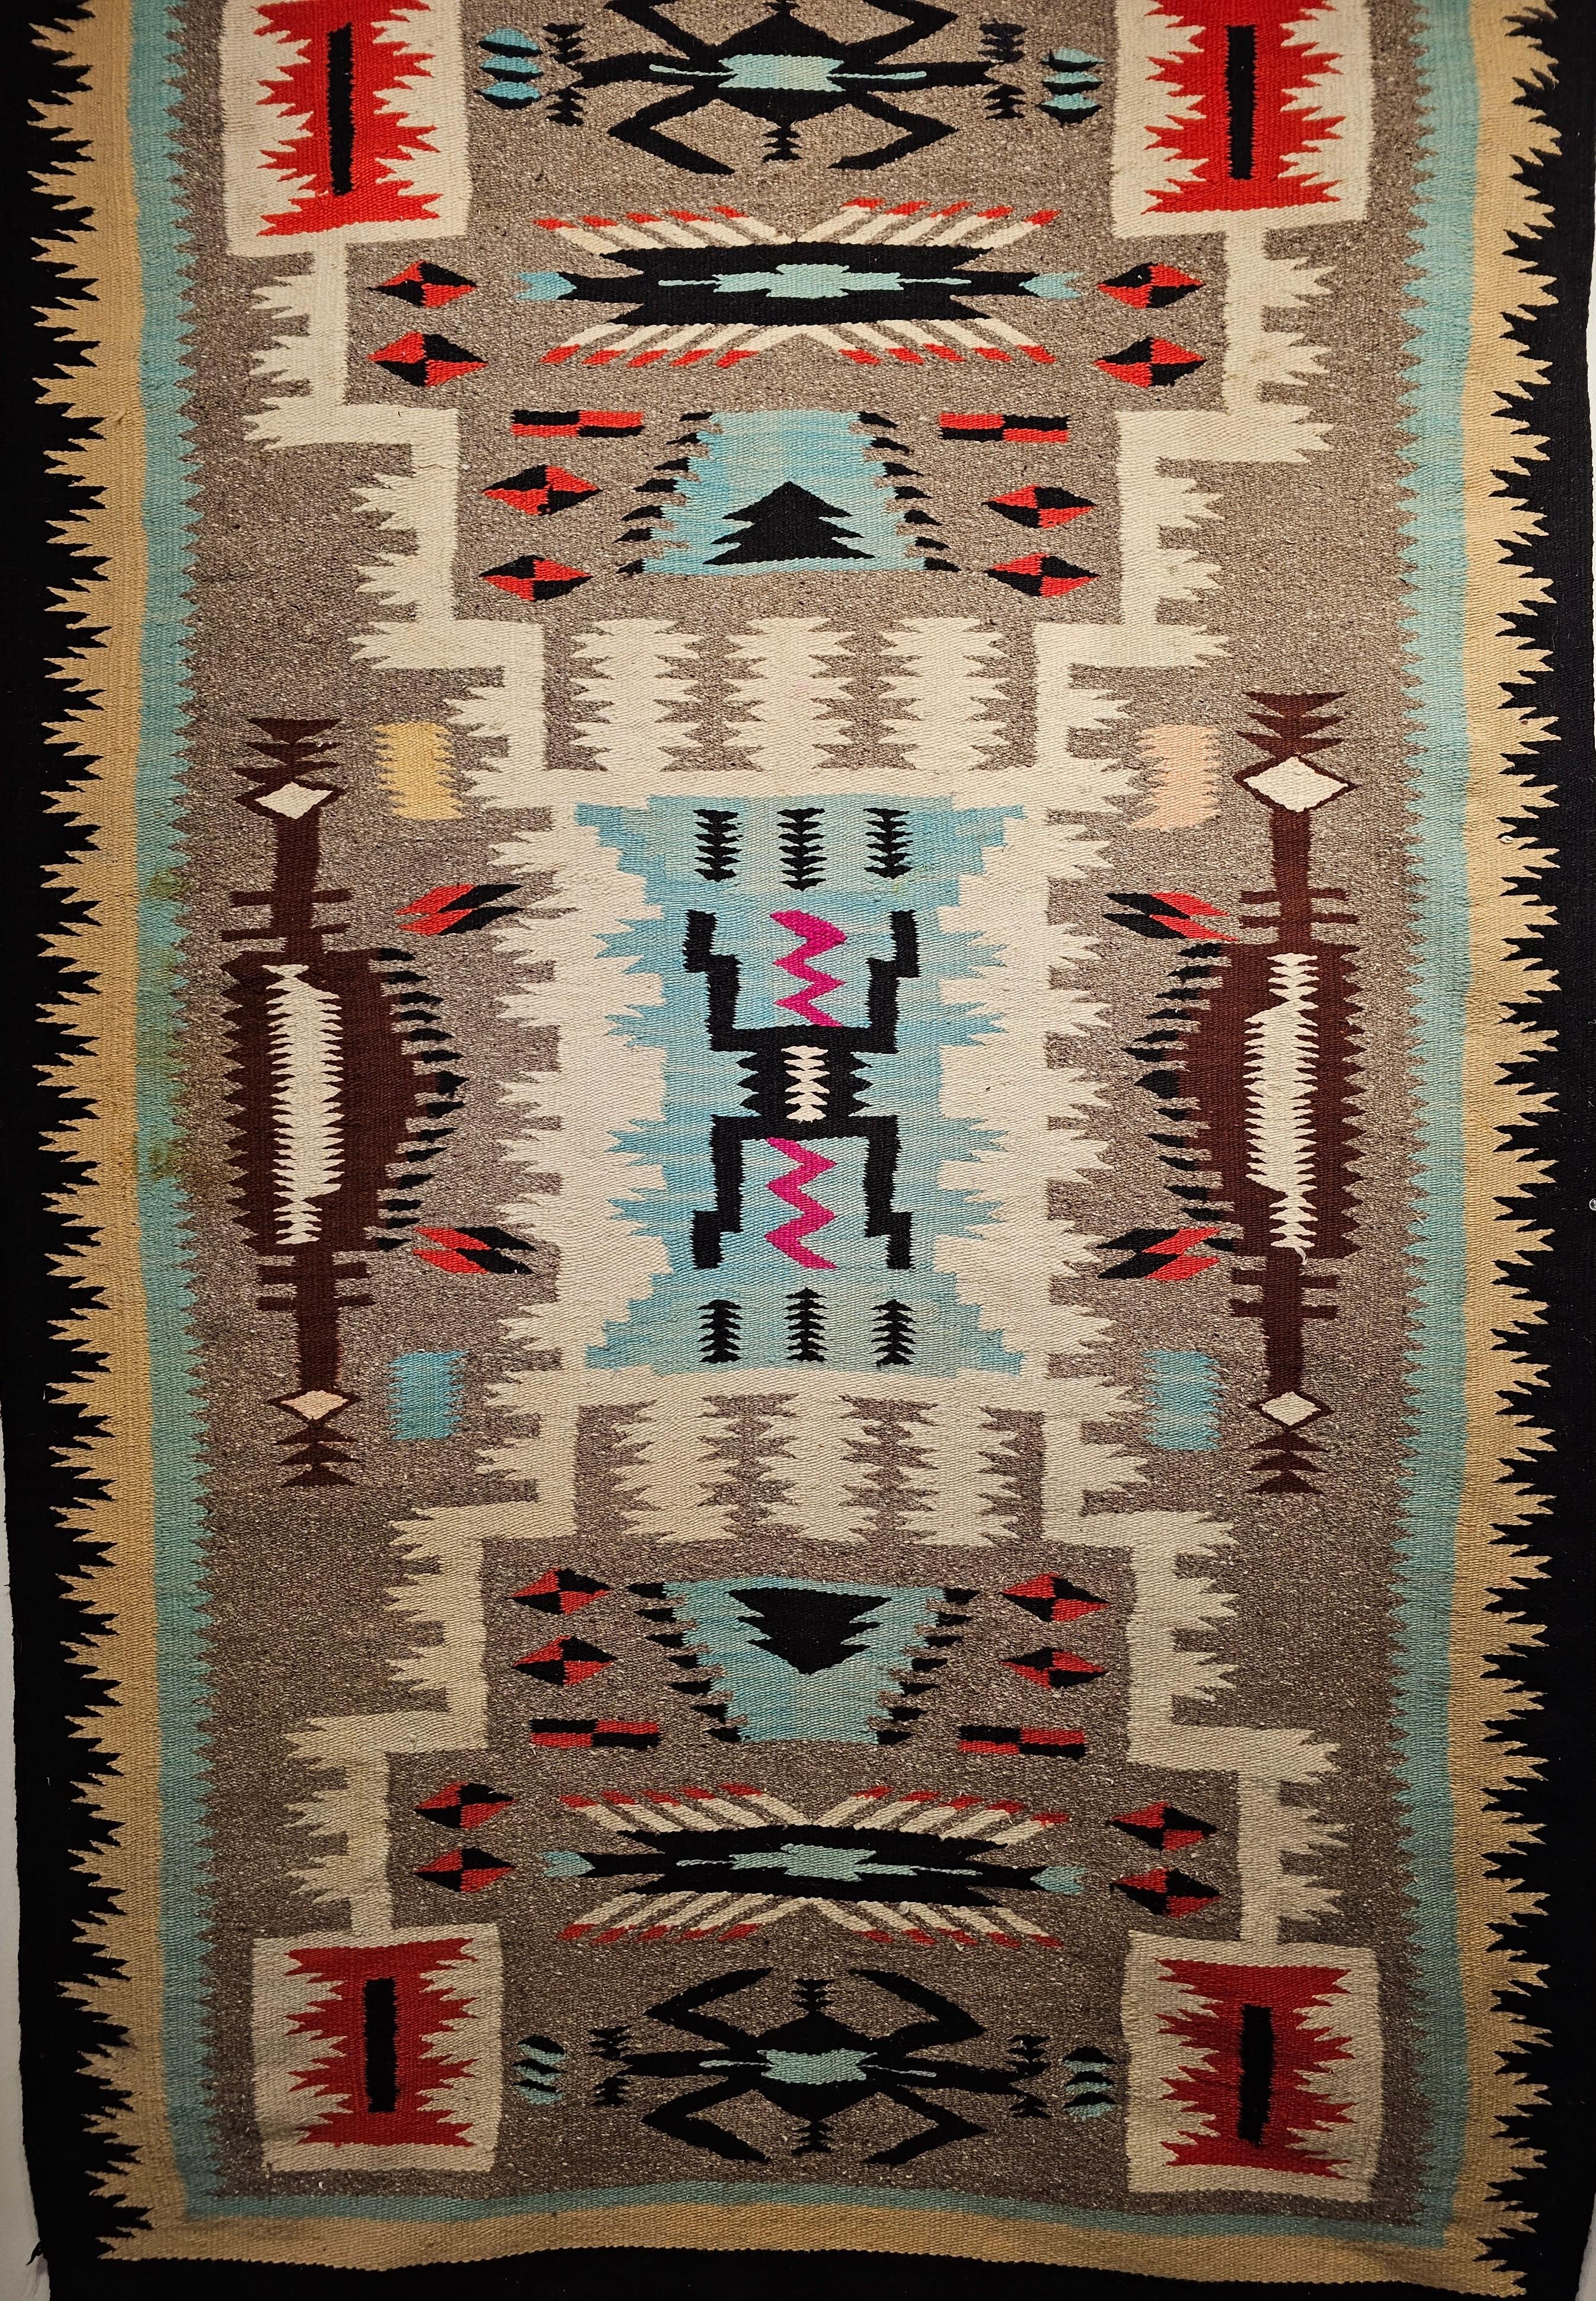 Vintage Native American Navajo Rug in a Storm Warrior Design in turquoise, Pink, and Brown Colors.  The Navajo rug was hand-woven in the SW United States and is from the mid 1900s. This rug has a very unique and wonderful color combination including